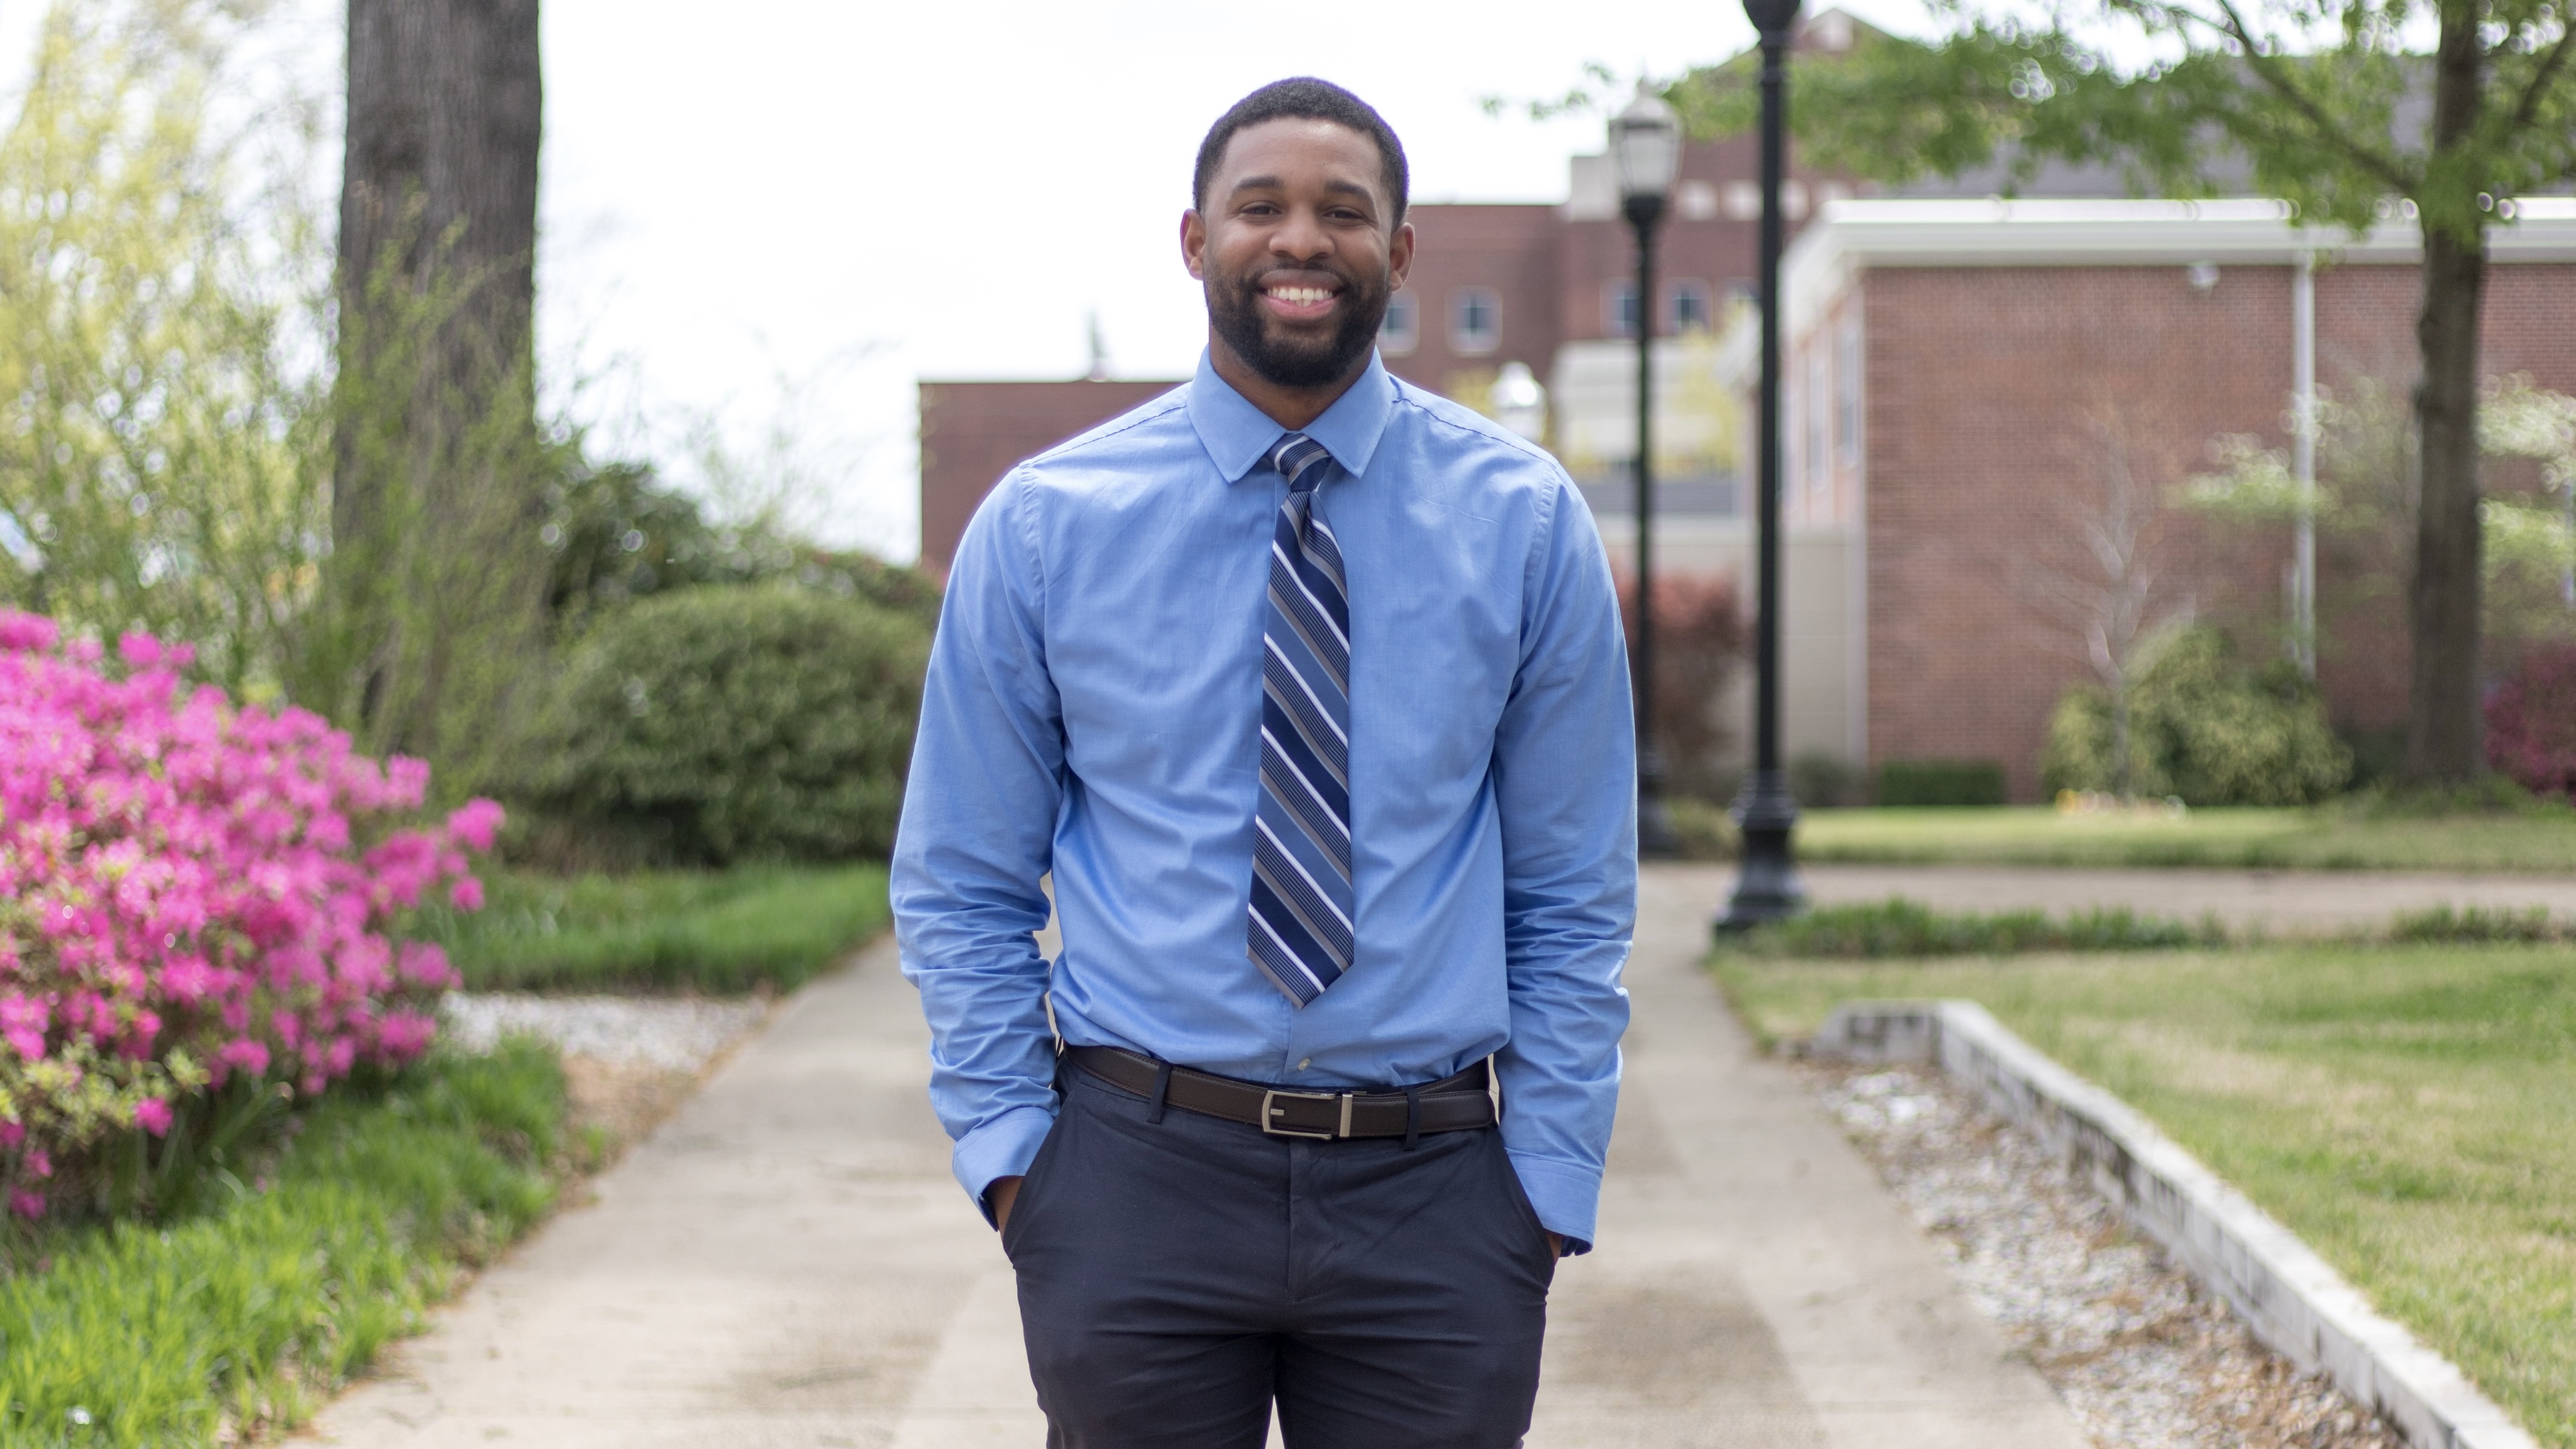 KaNeil Purifoy, licensed counselor at Ouachita Baptist University